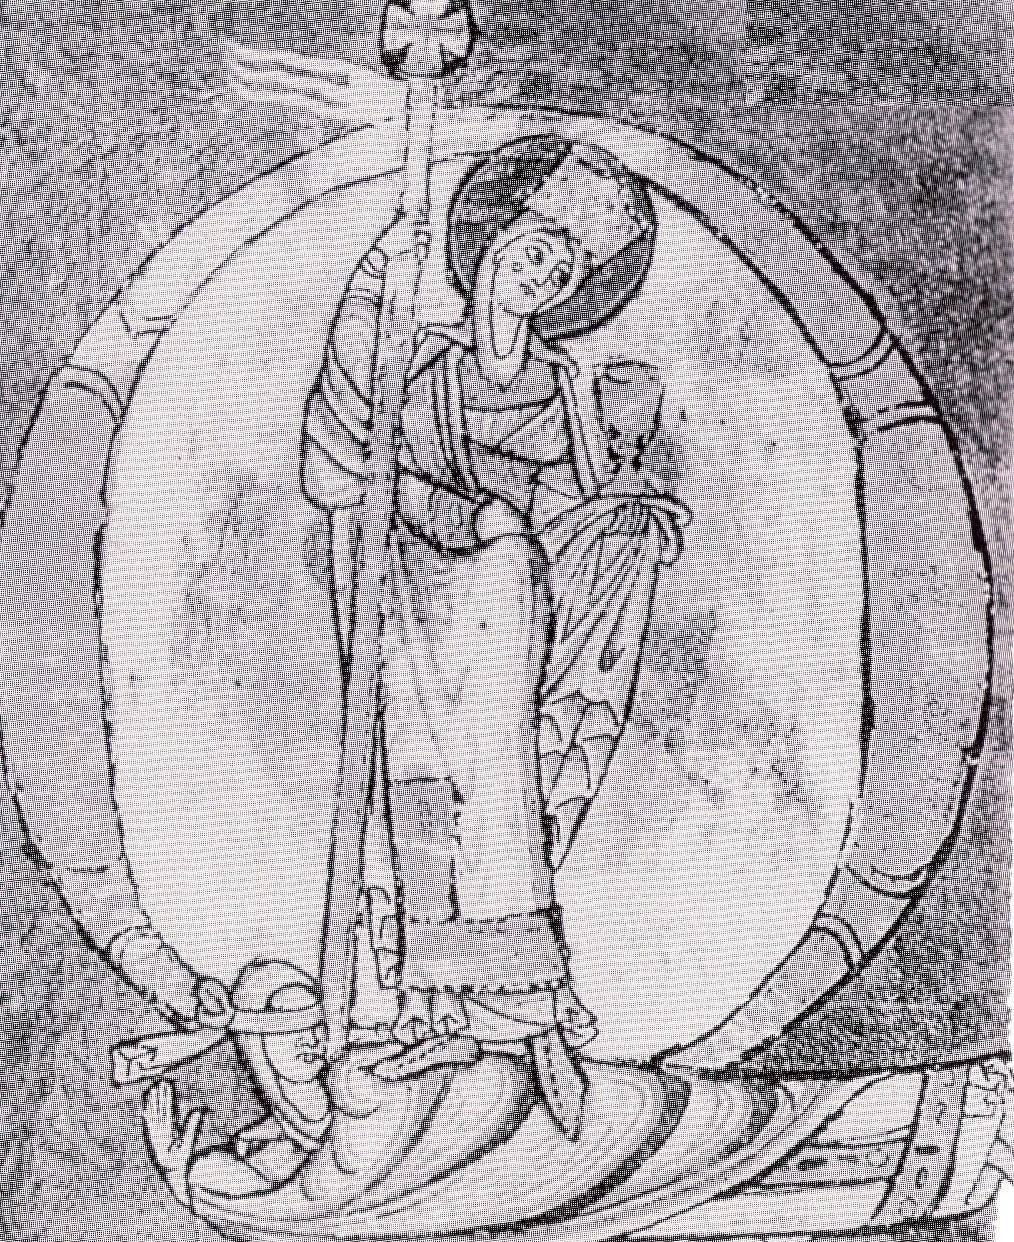 Synagoga and Ecclesia above the portico of the Cathedral of Notre Dame de Paris (c. 1240).